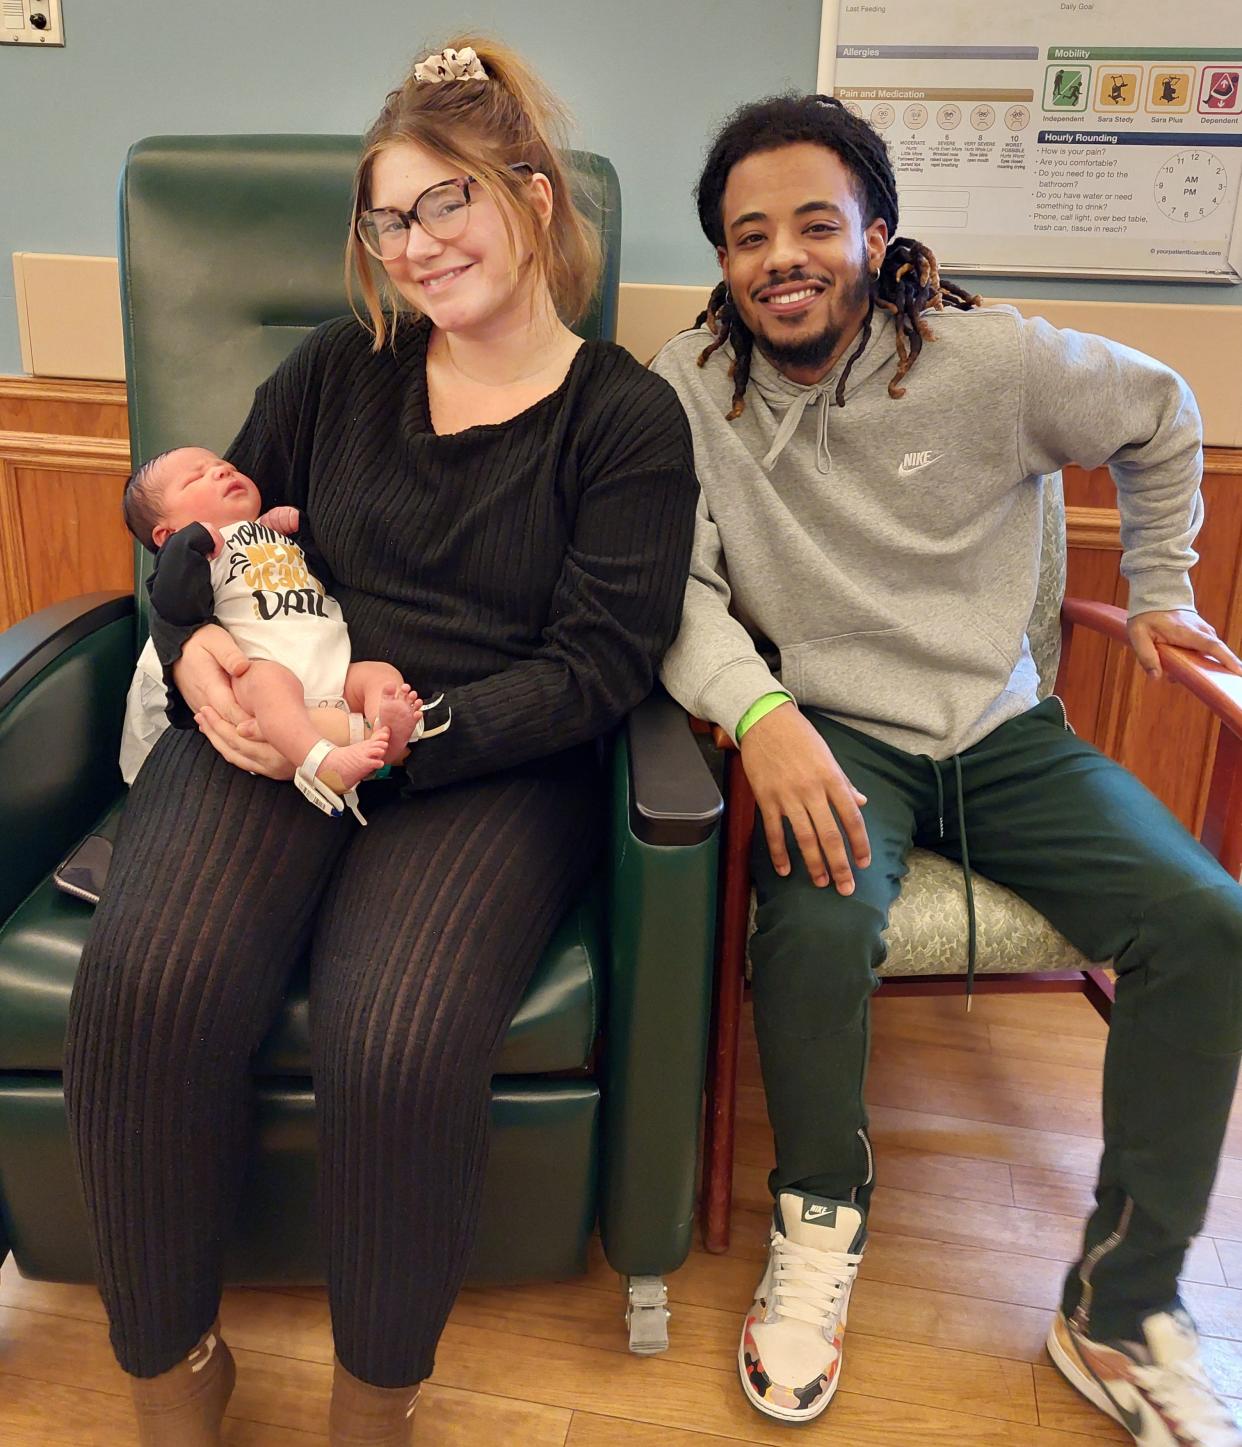 Princeton Christopher Rocker, son of Katelynn Bowman and Johnathan Rocker, was the first baby born in 2023 at ProMedica Monroe Regional Hospital.  Princeton was born at 9:41 a.m. Jan. 1, 2023.